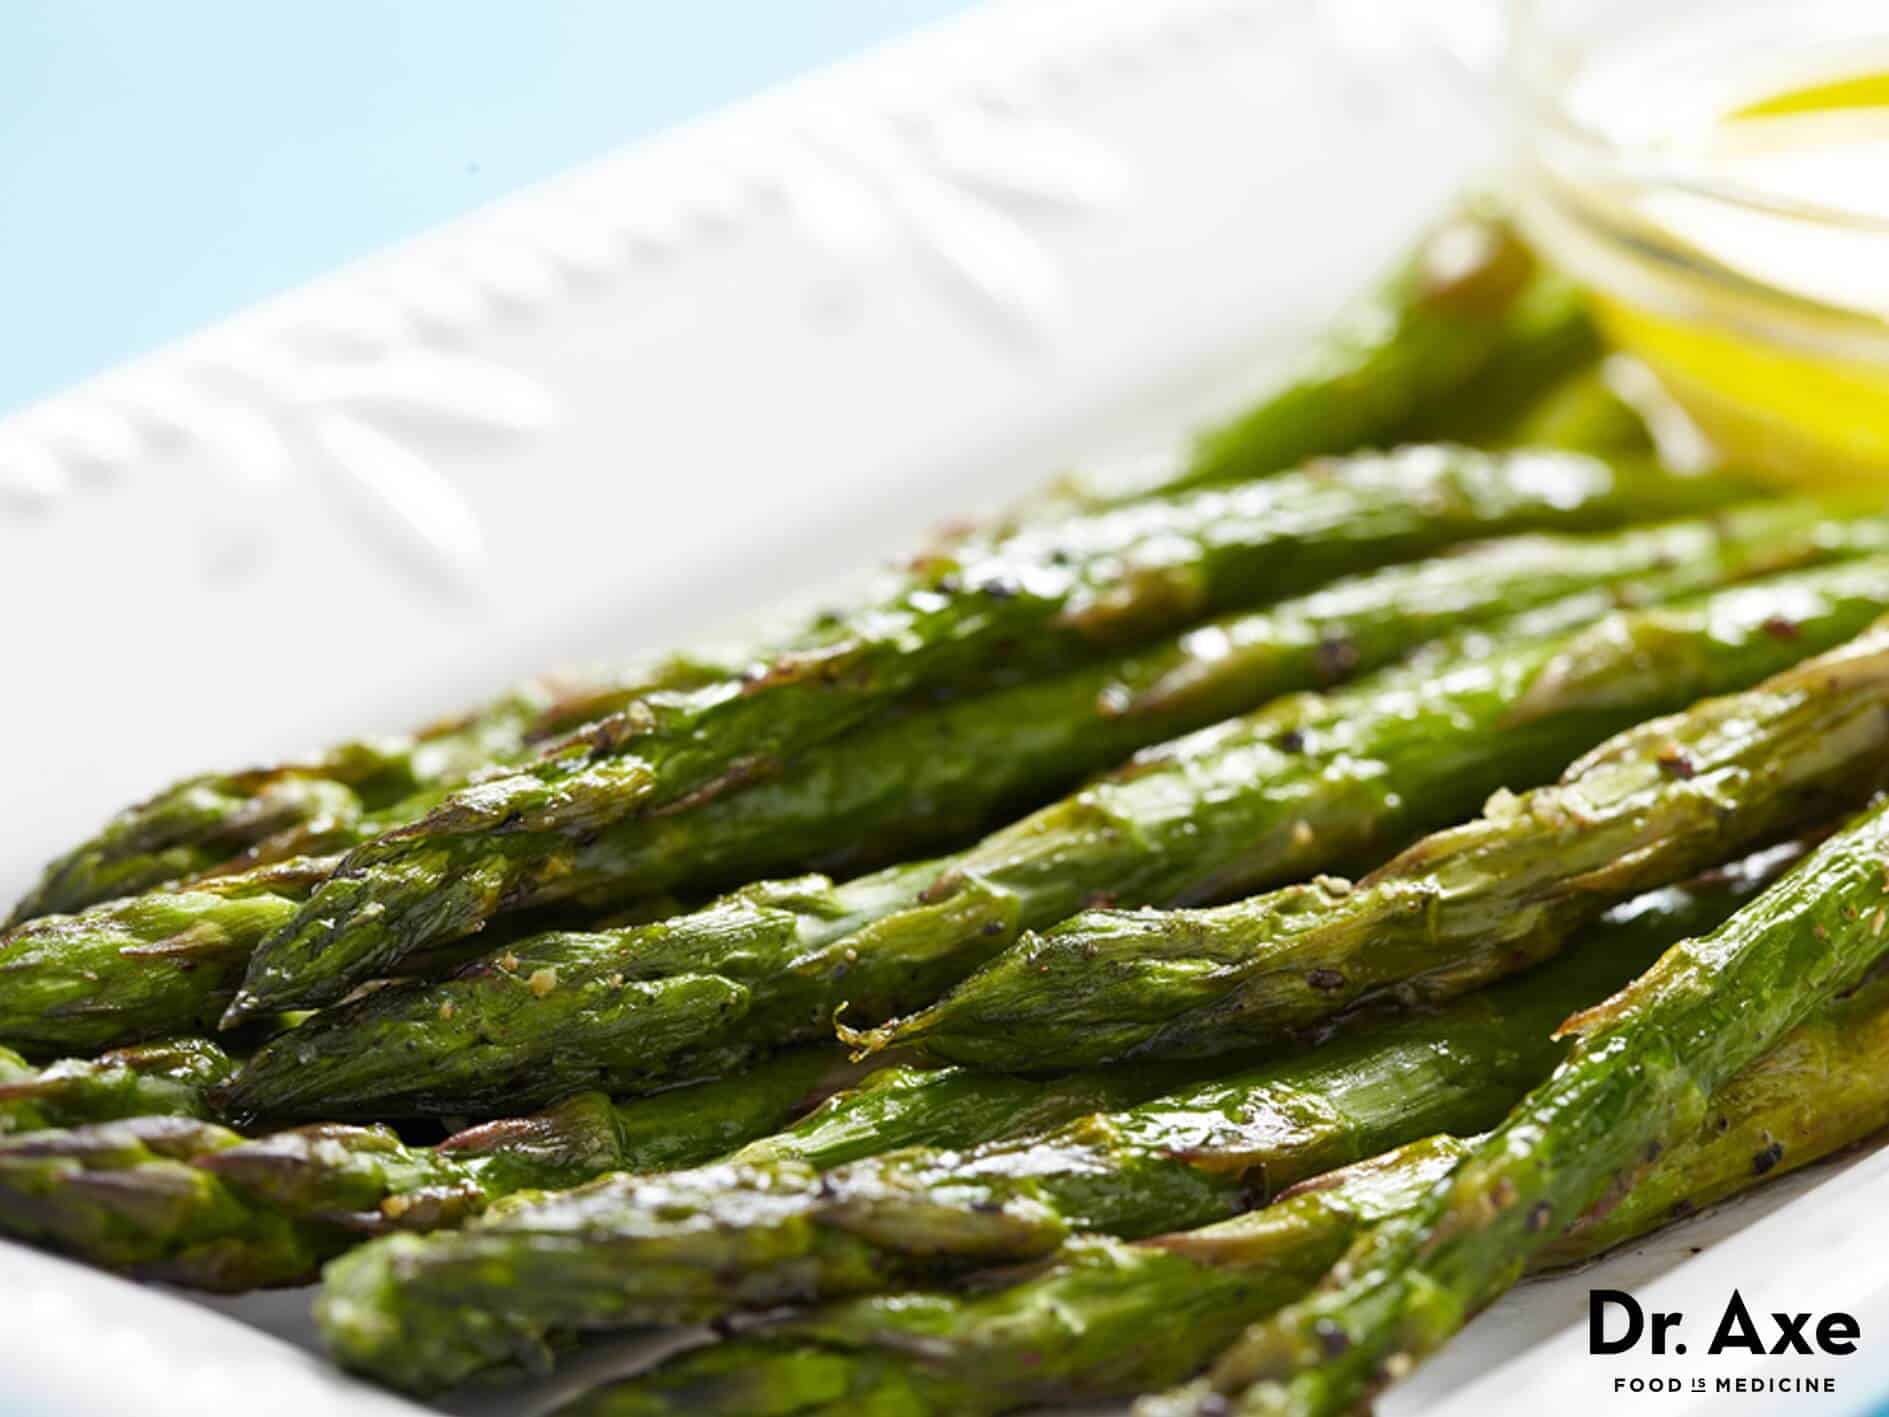 Asparagus tapas with red pepper sauce recipe - Dr. Axe